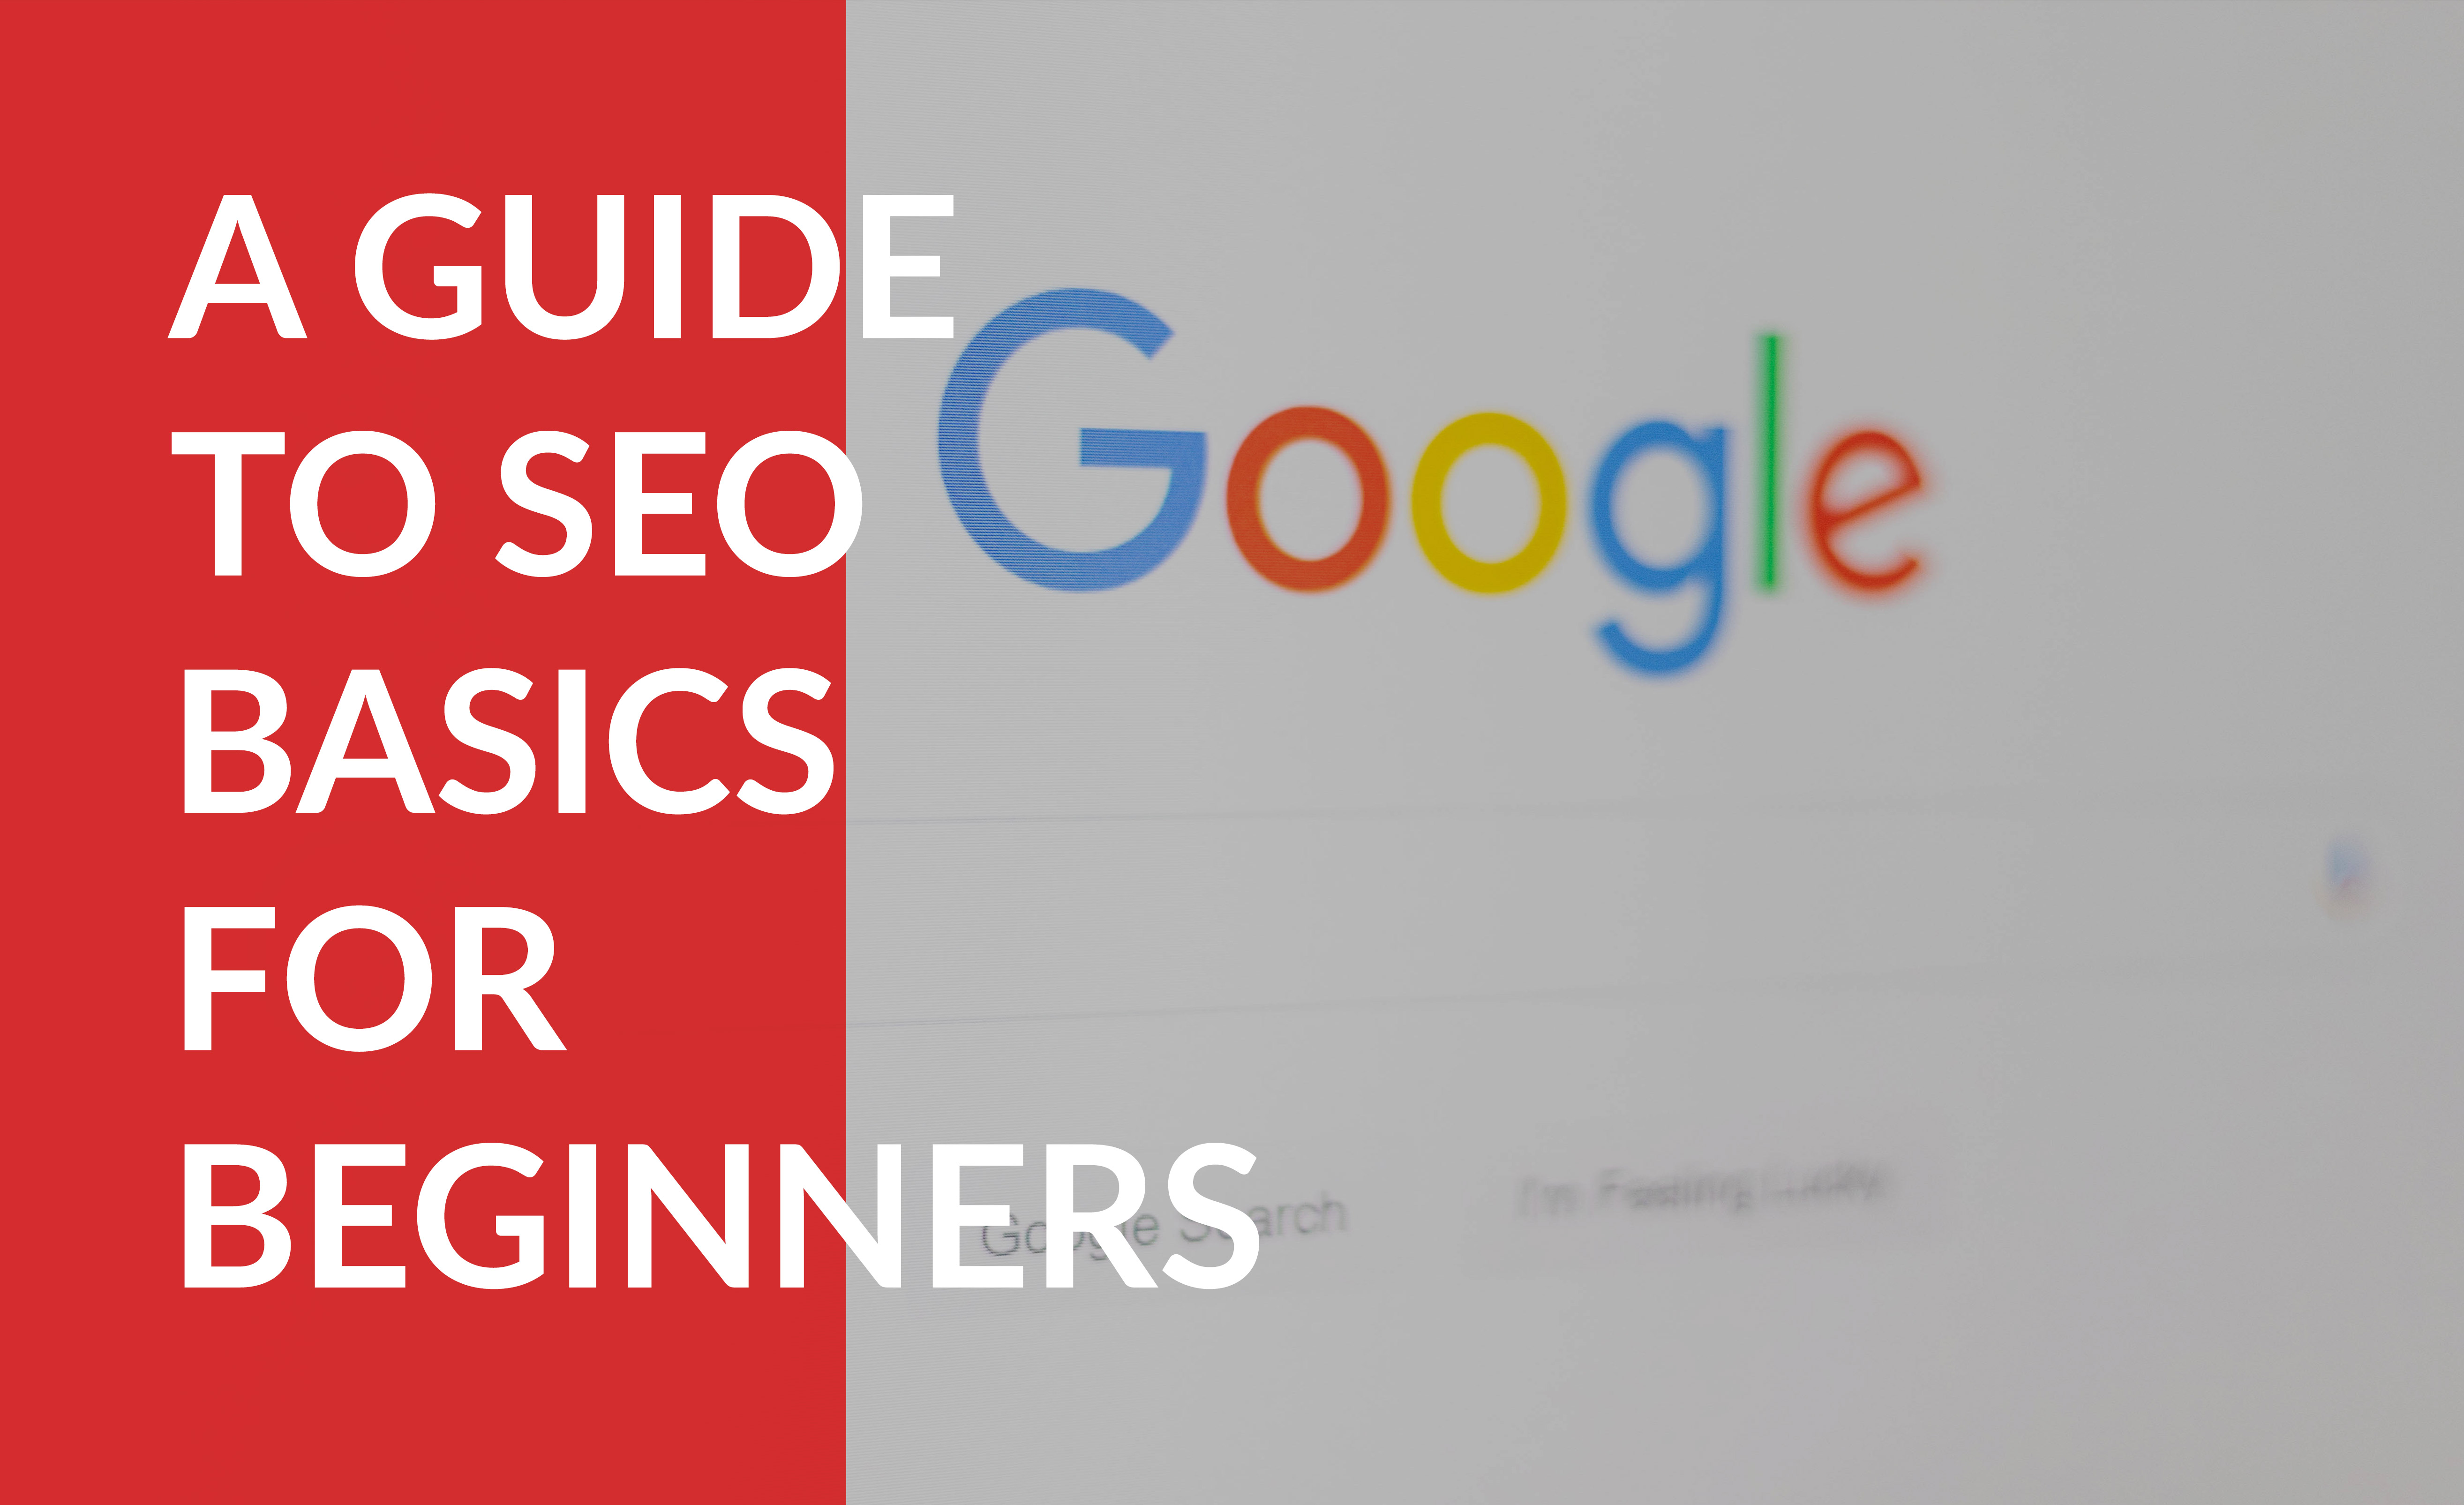 A Guide to SEO Basics for Beginners